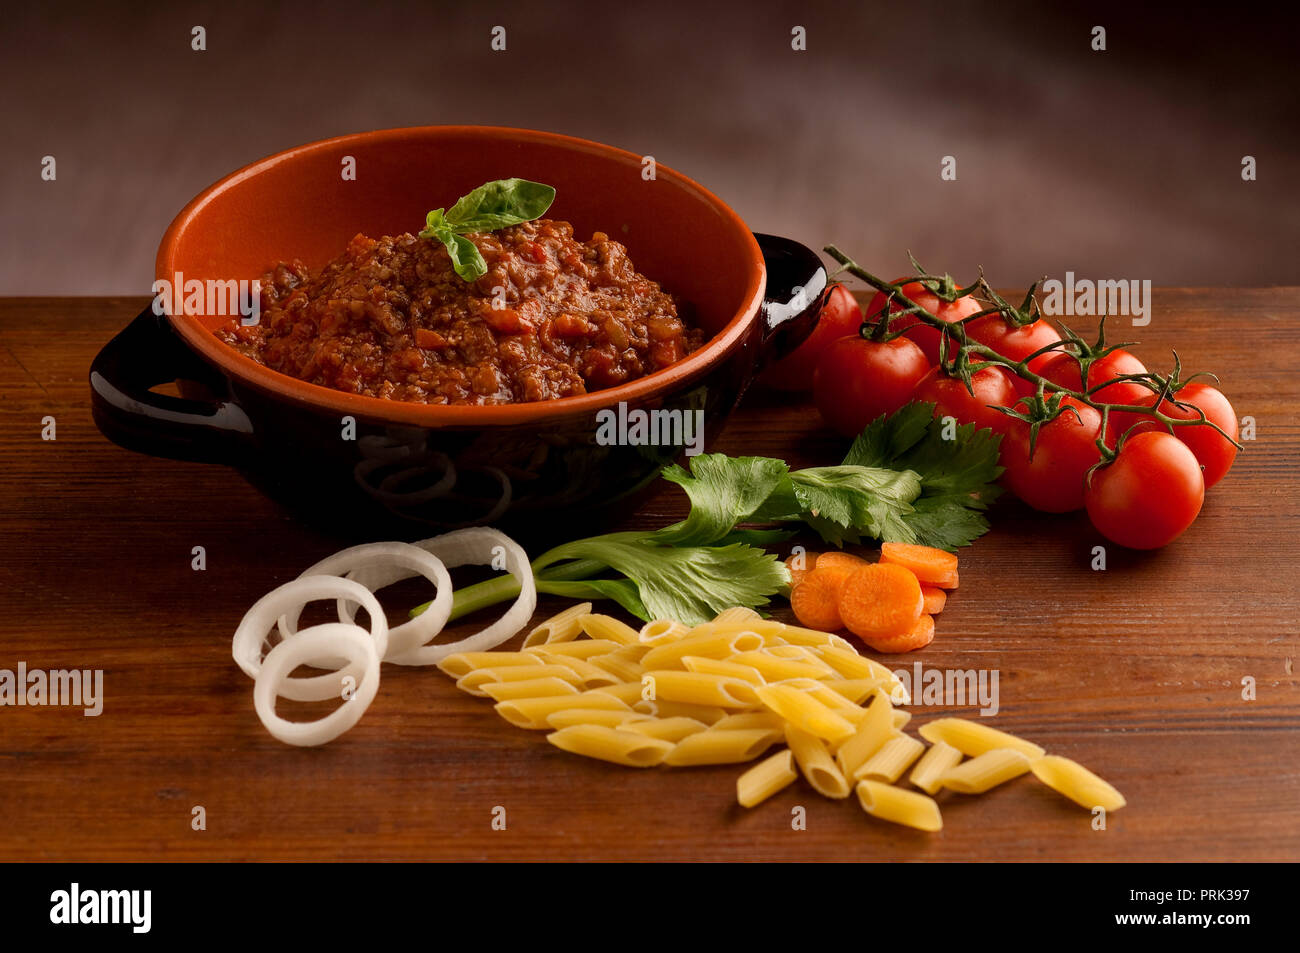 Penne pasta in tomato sauce with chicken, tomatoes decorated with parsley on a wooden table Stock Photo